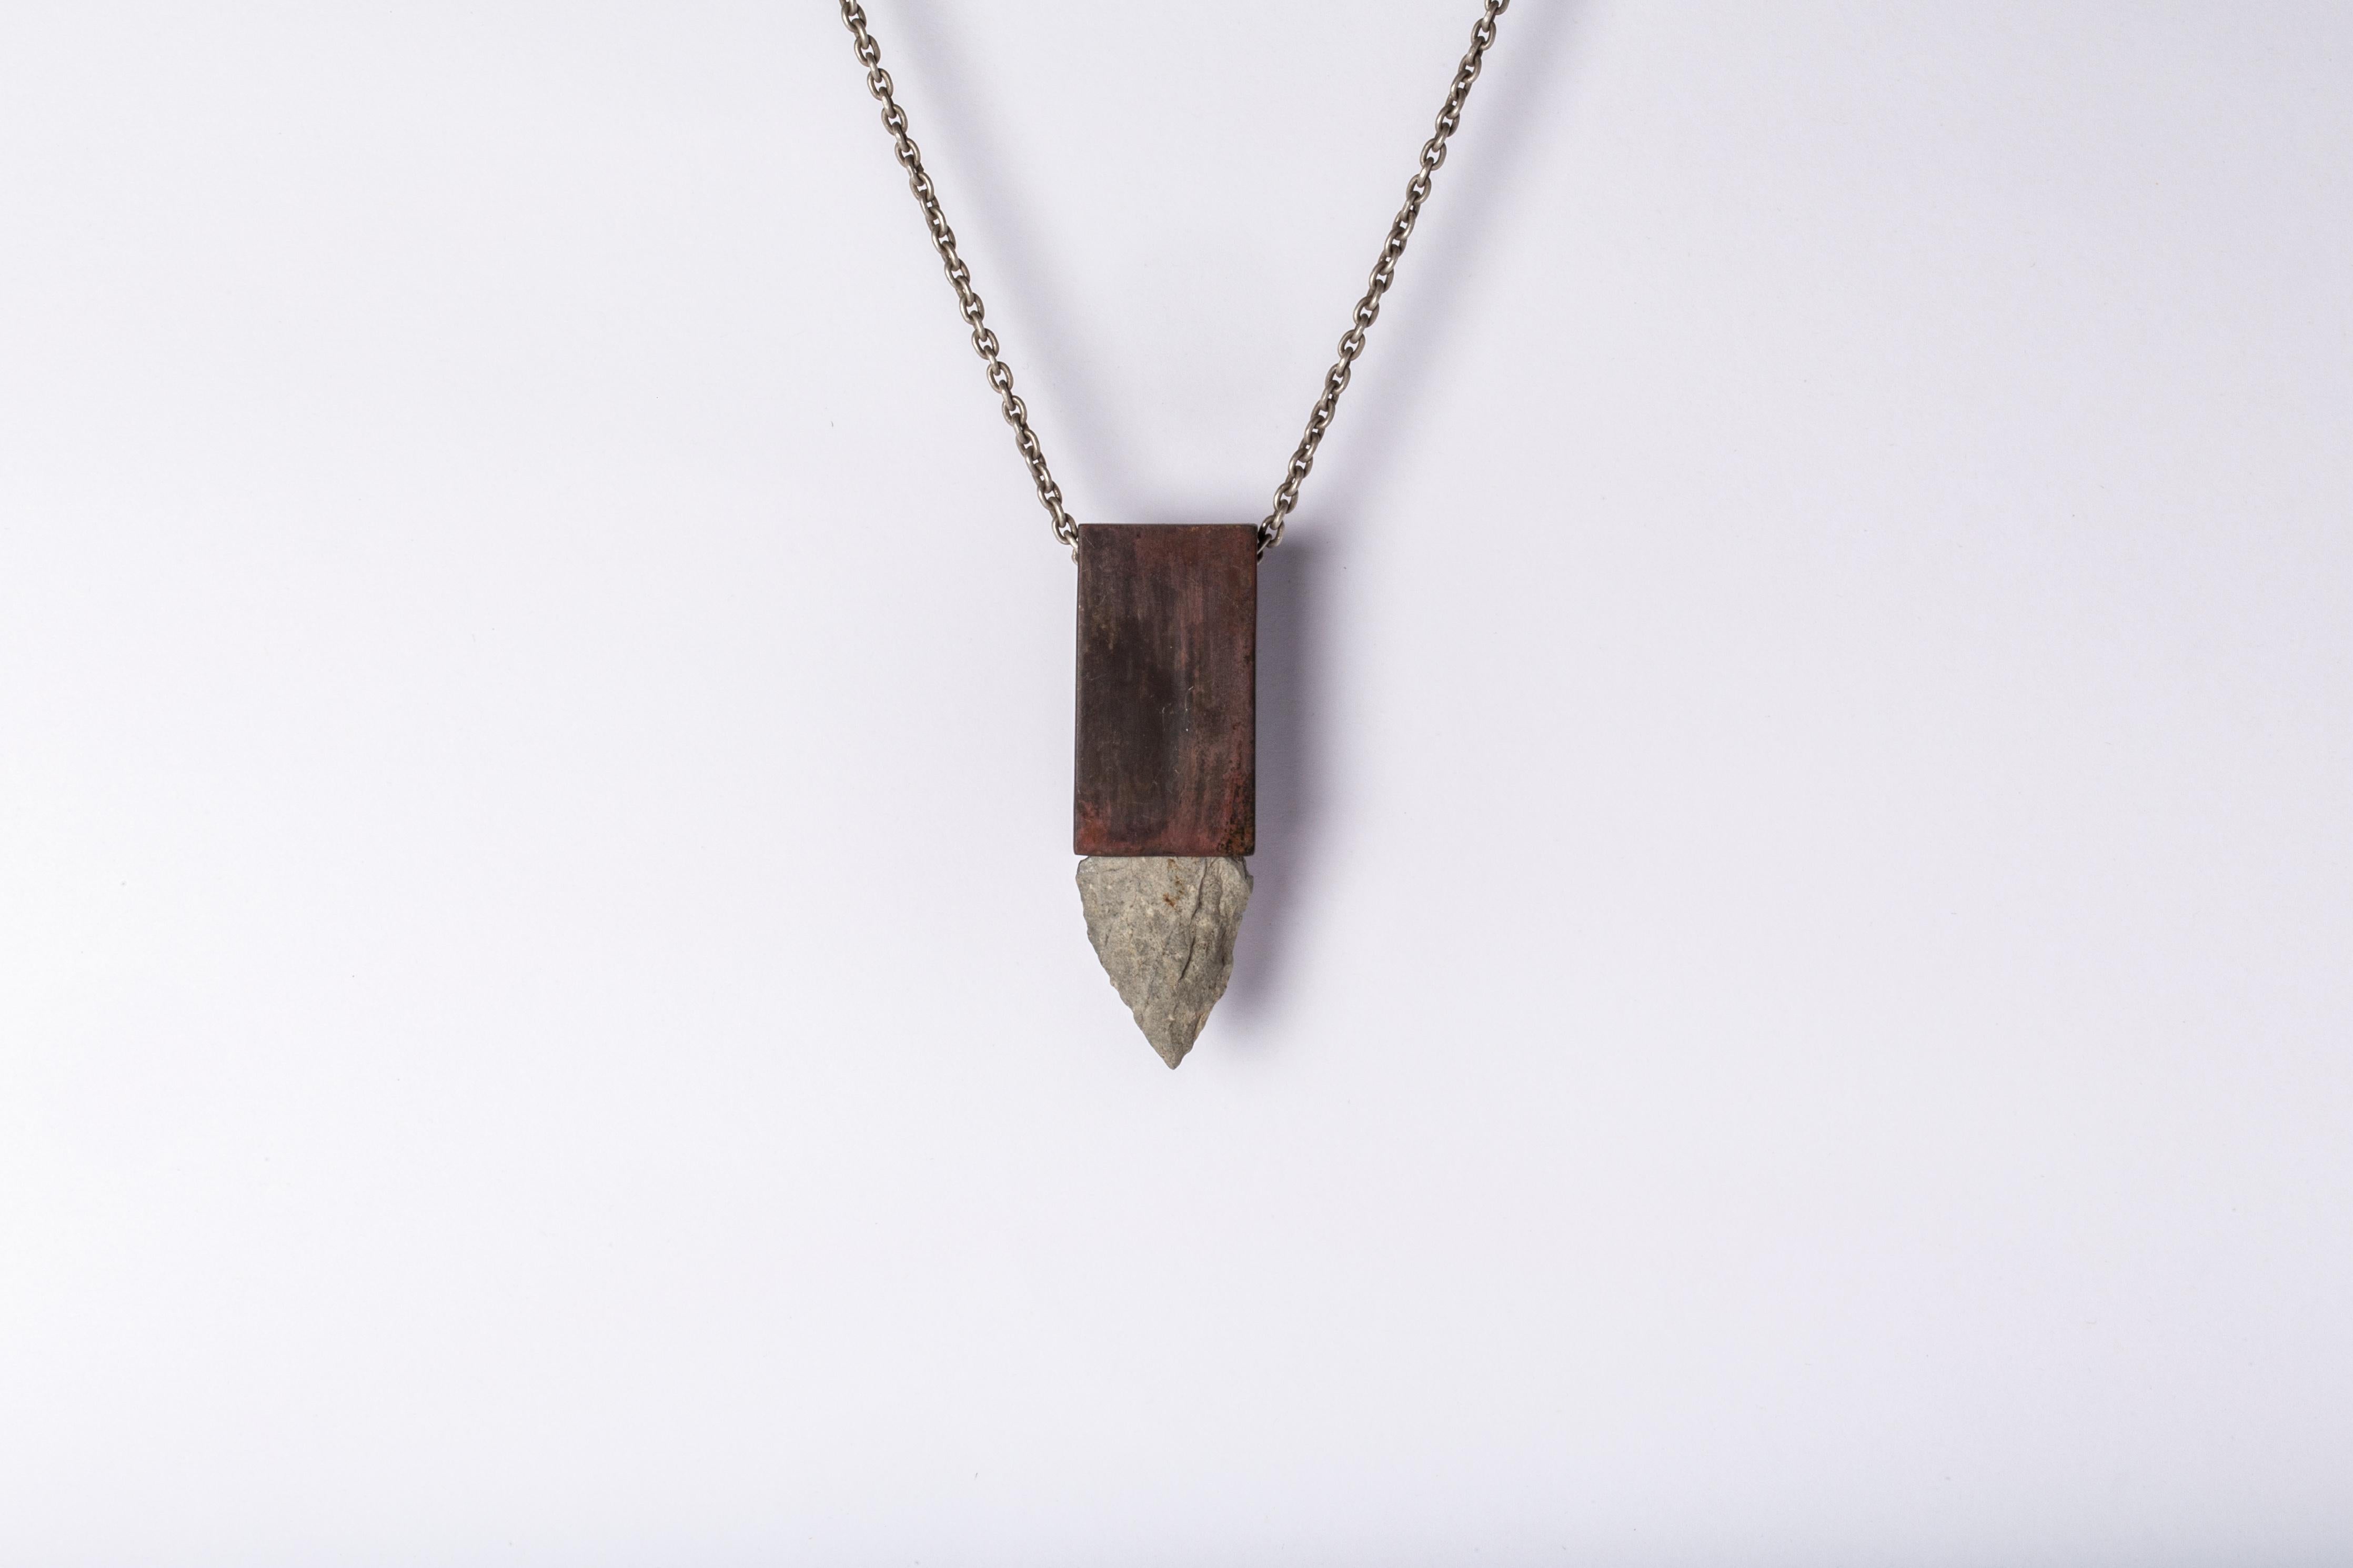 Necklace made in brass, sterling silver, and a rough of arrowhead stone. The brass color is accomplished by burning the metal to the point that it releases its impurities and self colorizes. This patina occurs from within, no chemical was added to